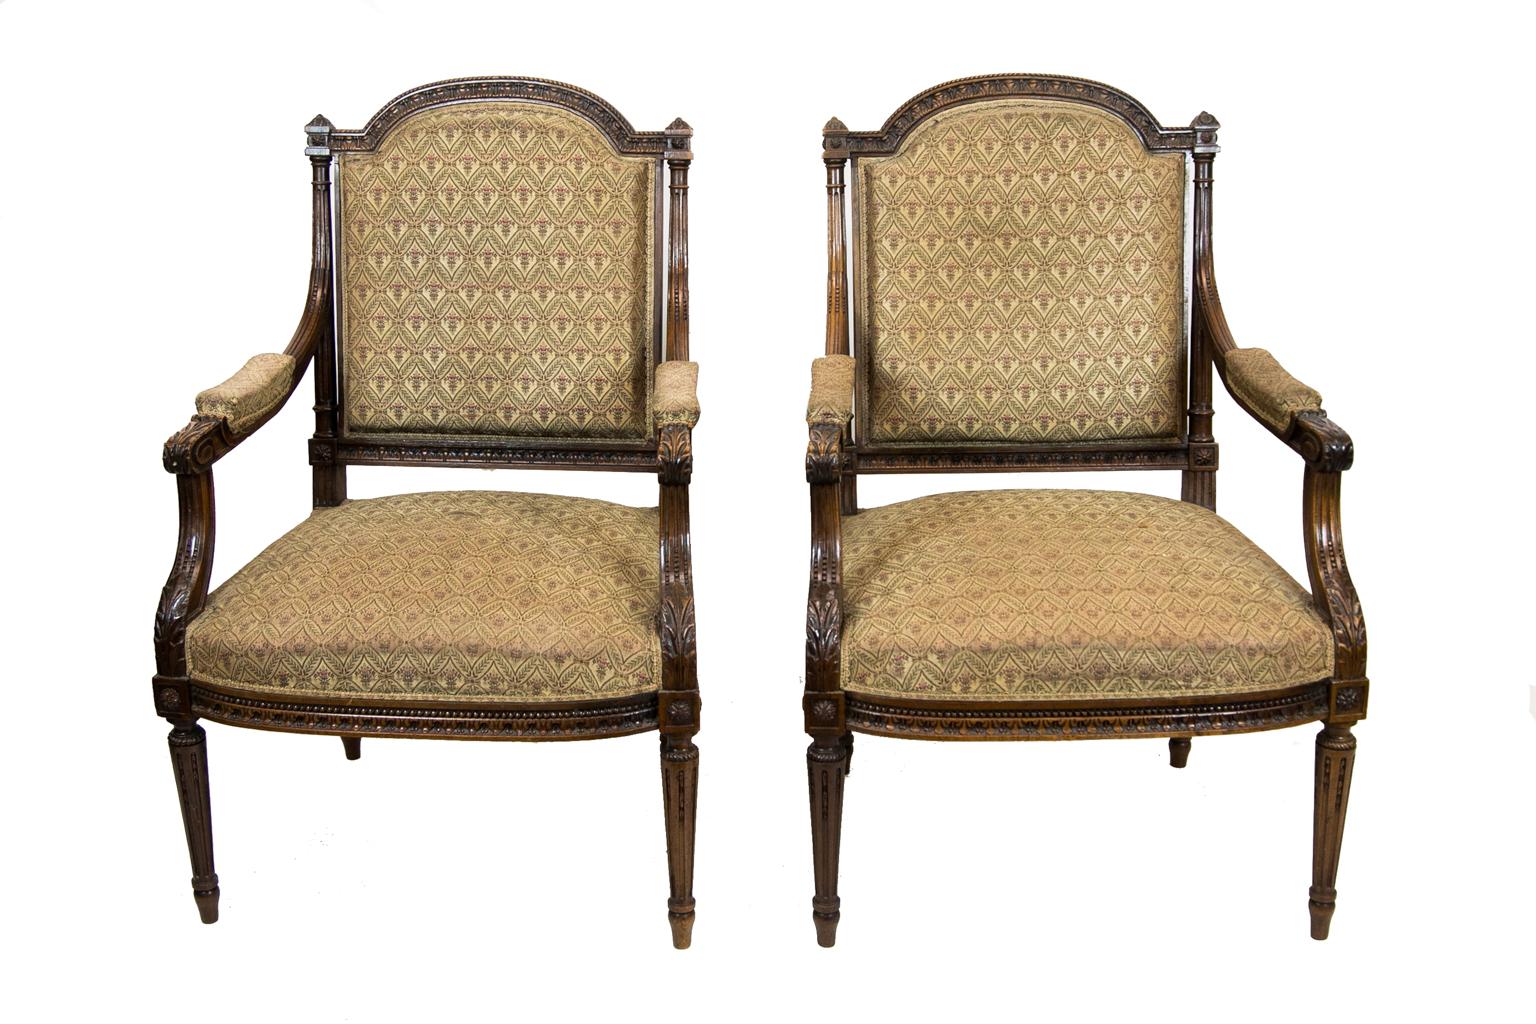 Pair of French walnut carved armchairs, the crest rails are carved with spiral rope carving above a leaf and berry carving. The arms are stop fluted and terminate in carved acanthus leaves.
** the tips of the arm upholstery have worn through.
  